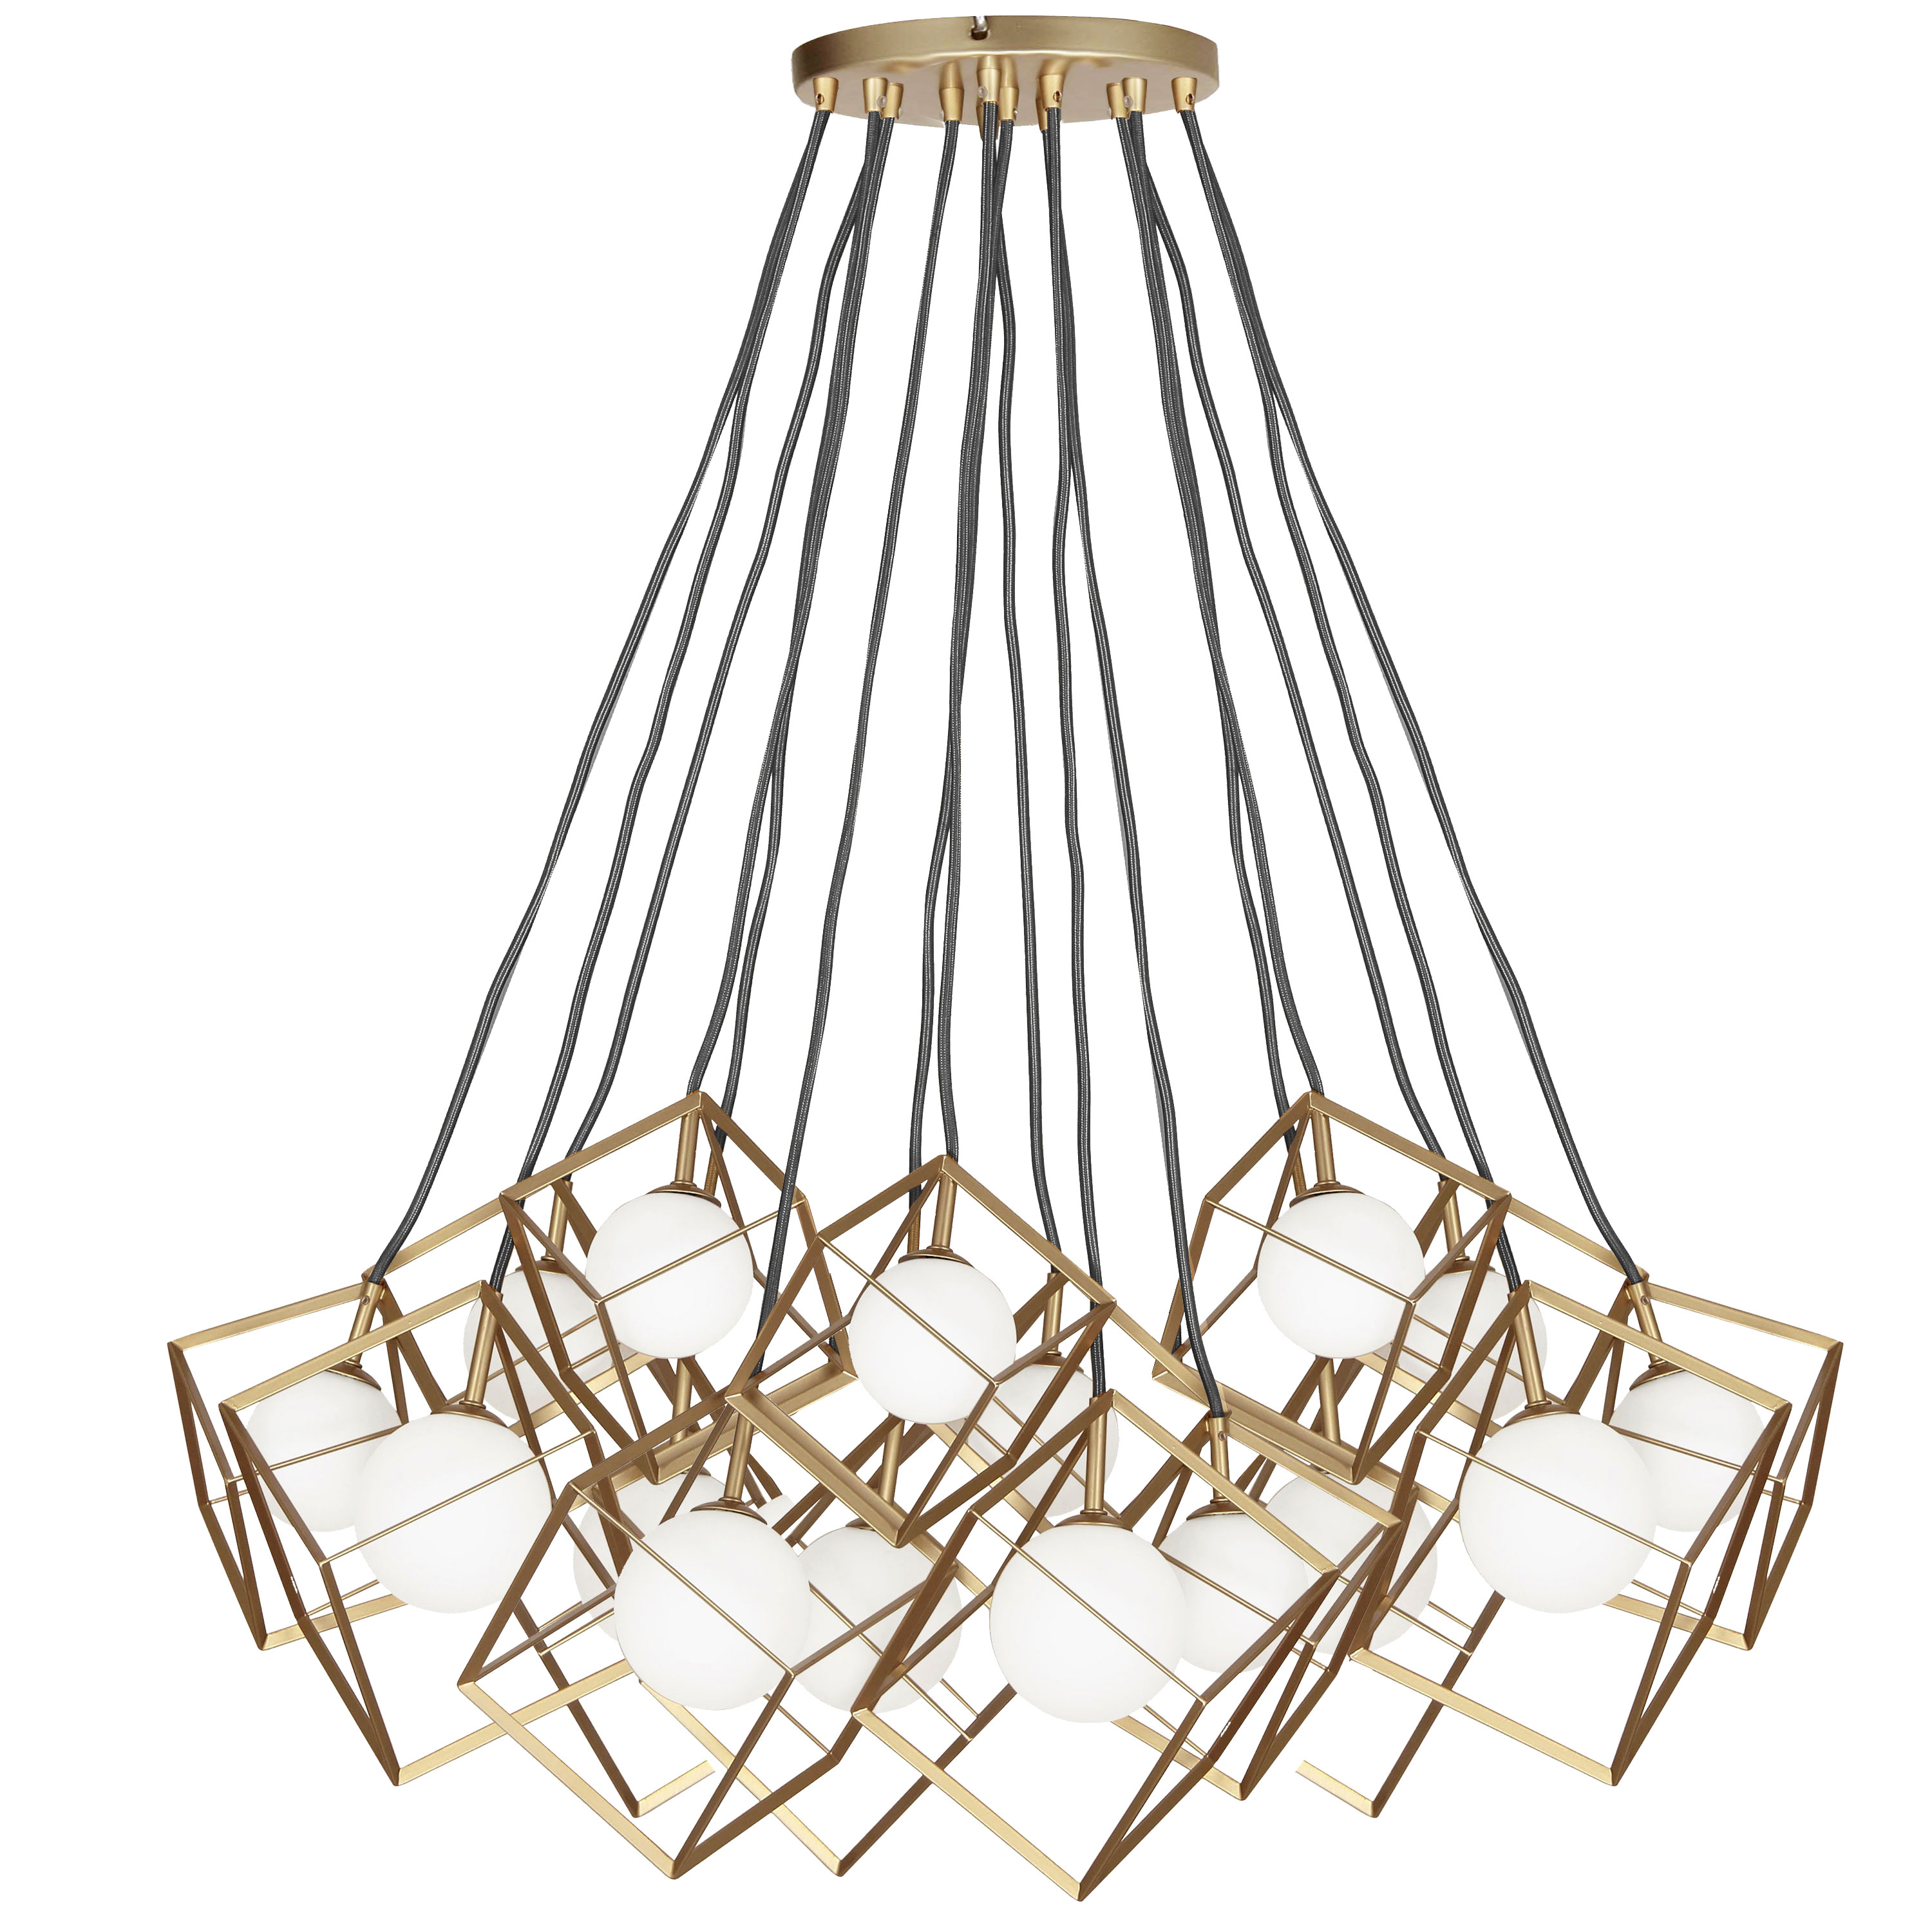 16 Light Halogen Pendant, Gold with White Glass